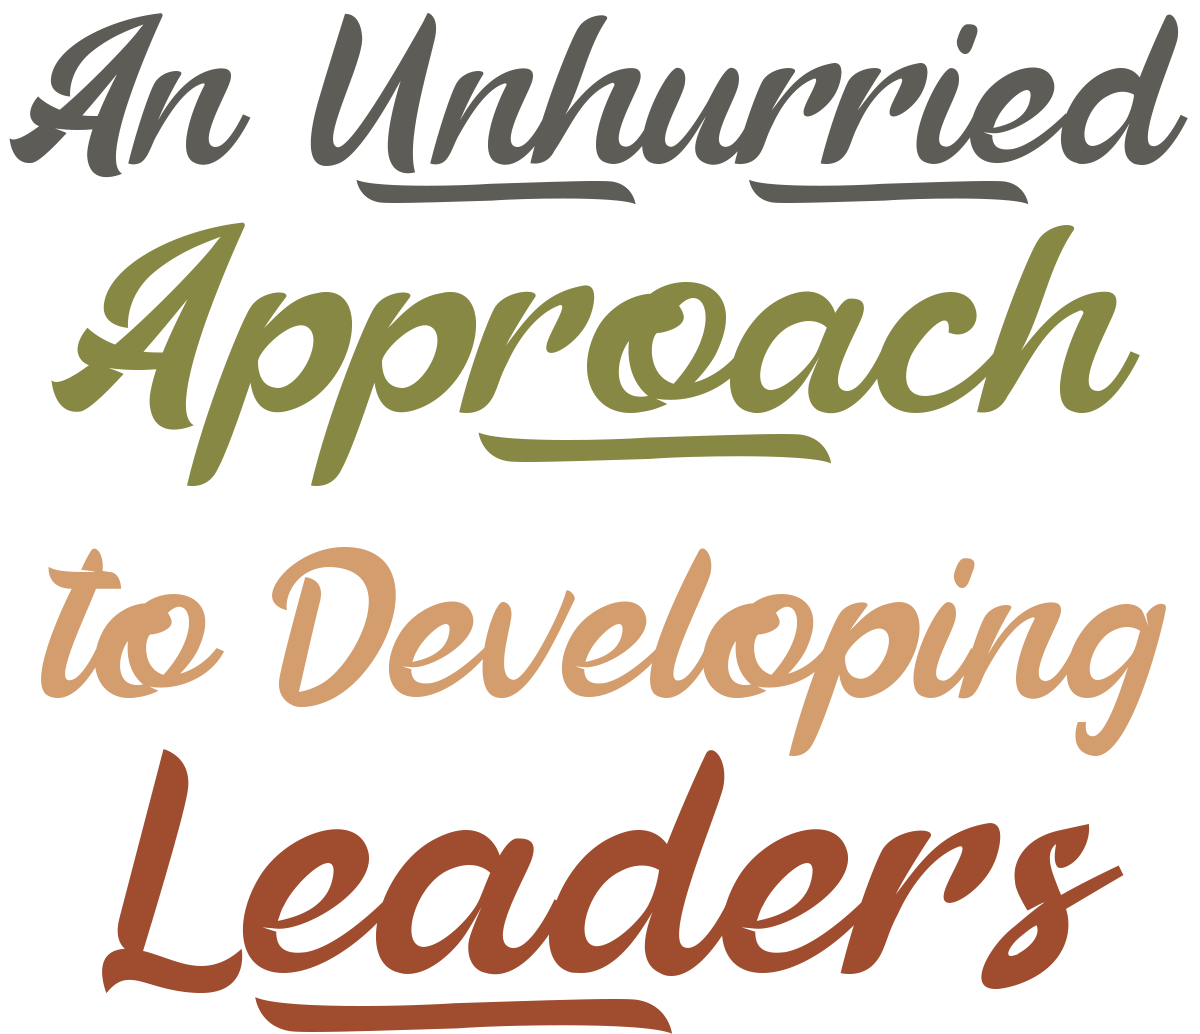 An Unhurried Approach to Developing Leaders title